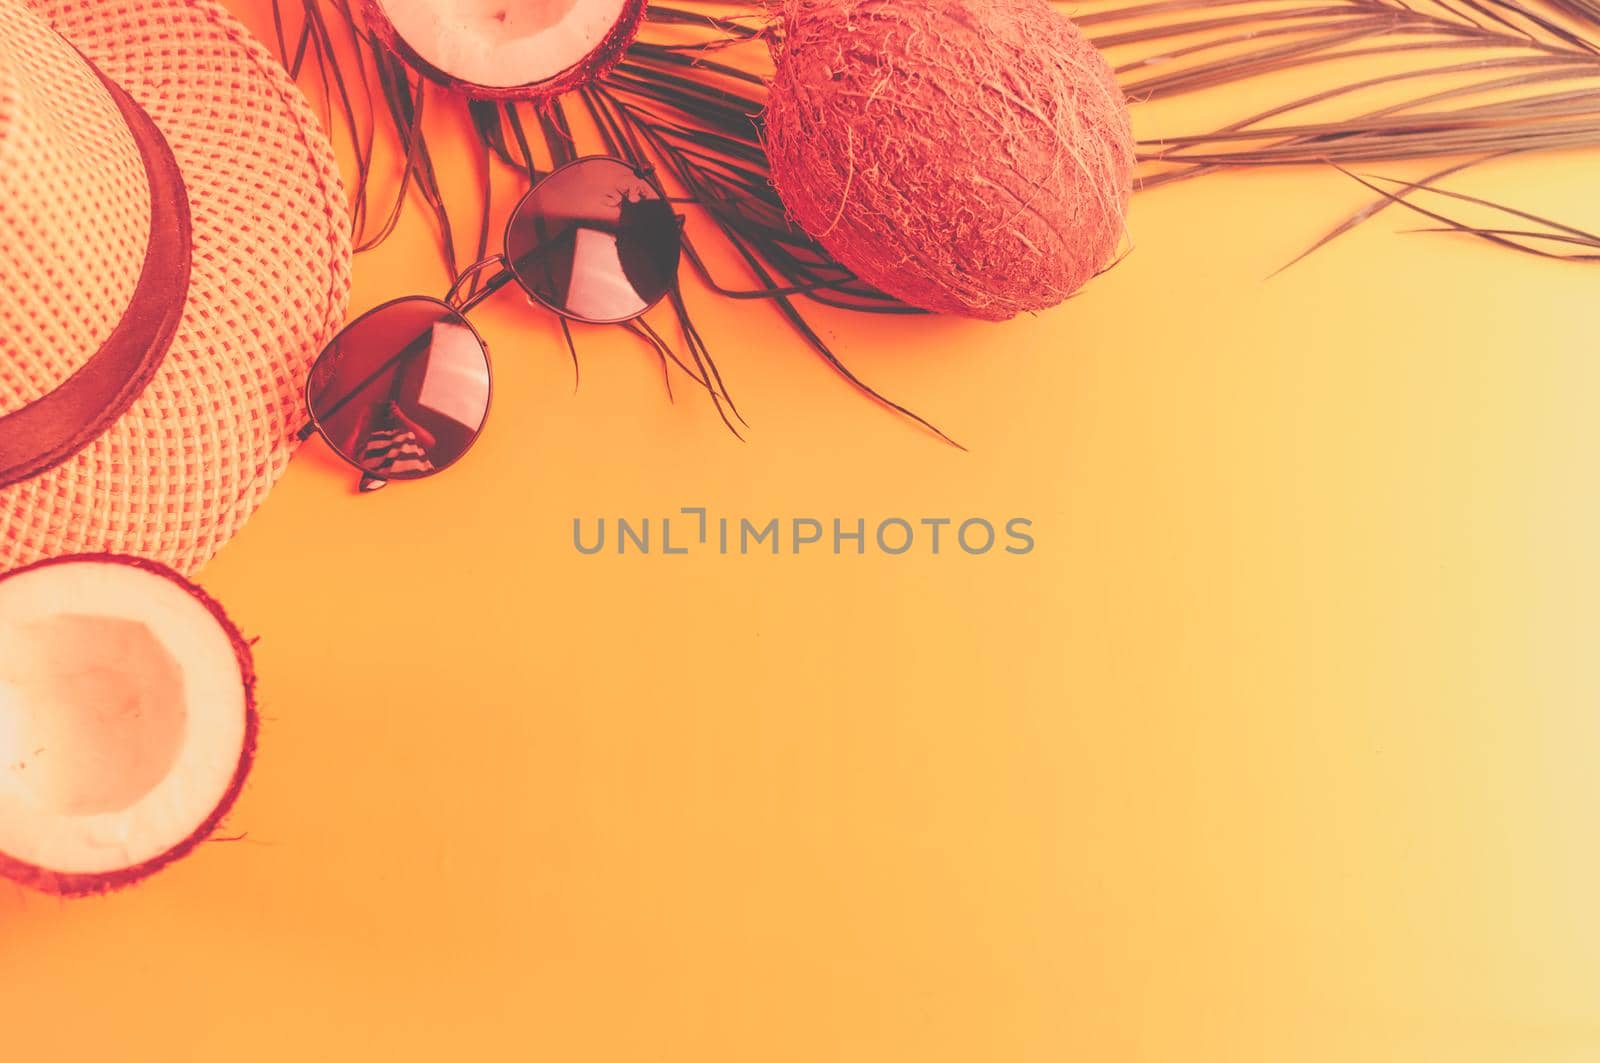 Summer composition with neon lights. Tropical palm leaves, hat, glasses and broken coconut on a sandy background. The concept of the summer season, parties and heat. Flat lay, top view, copy space